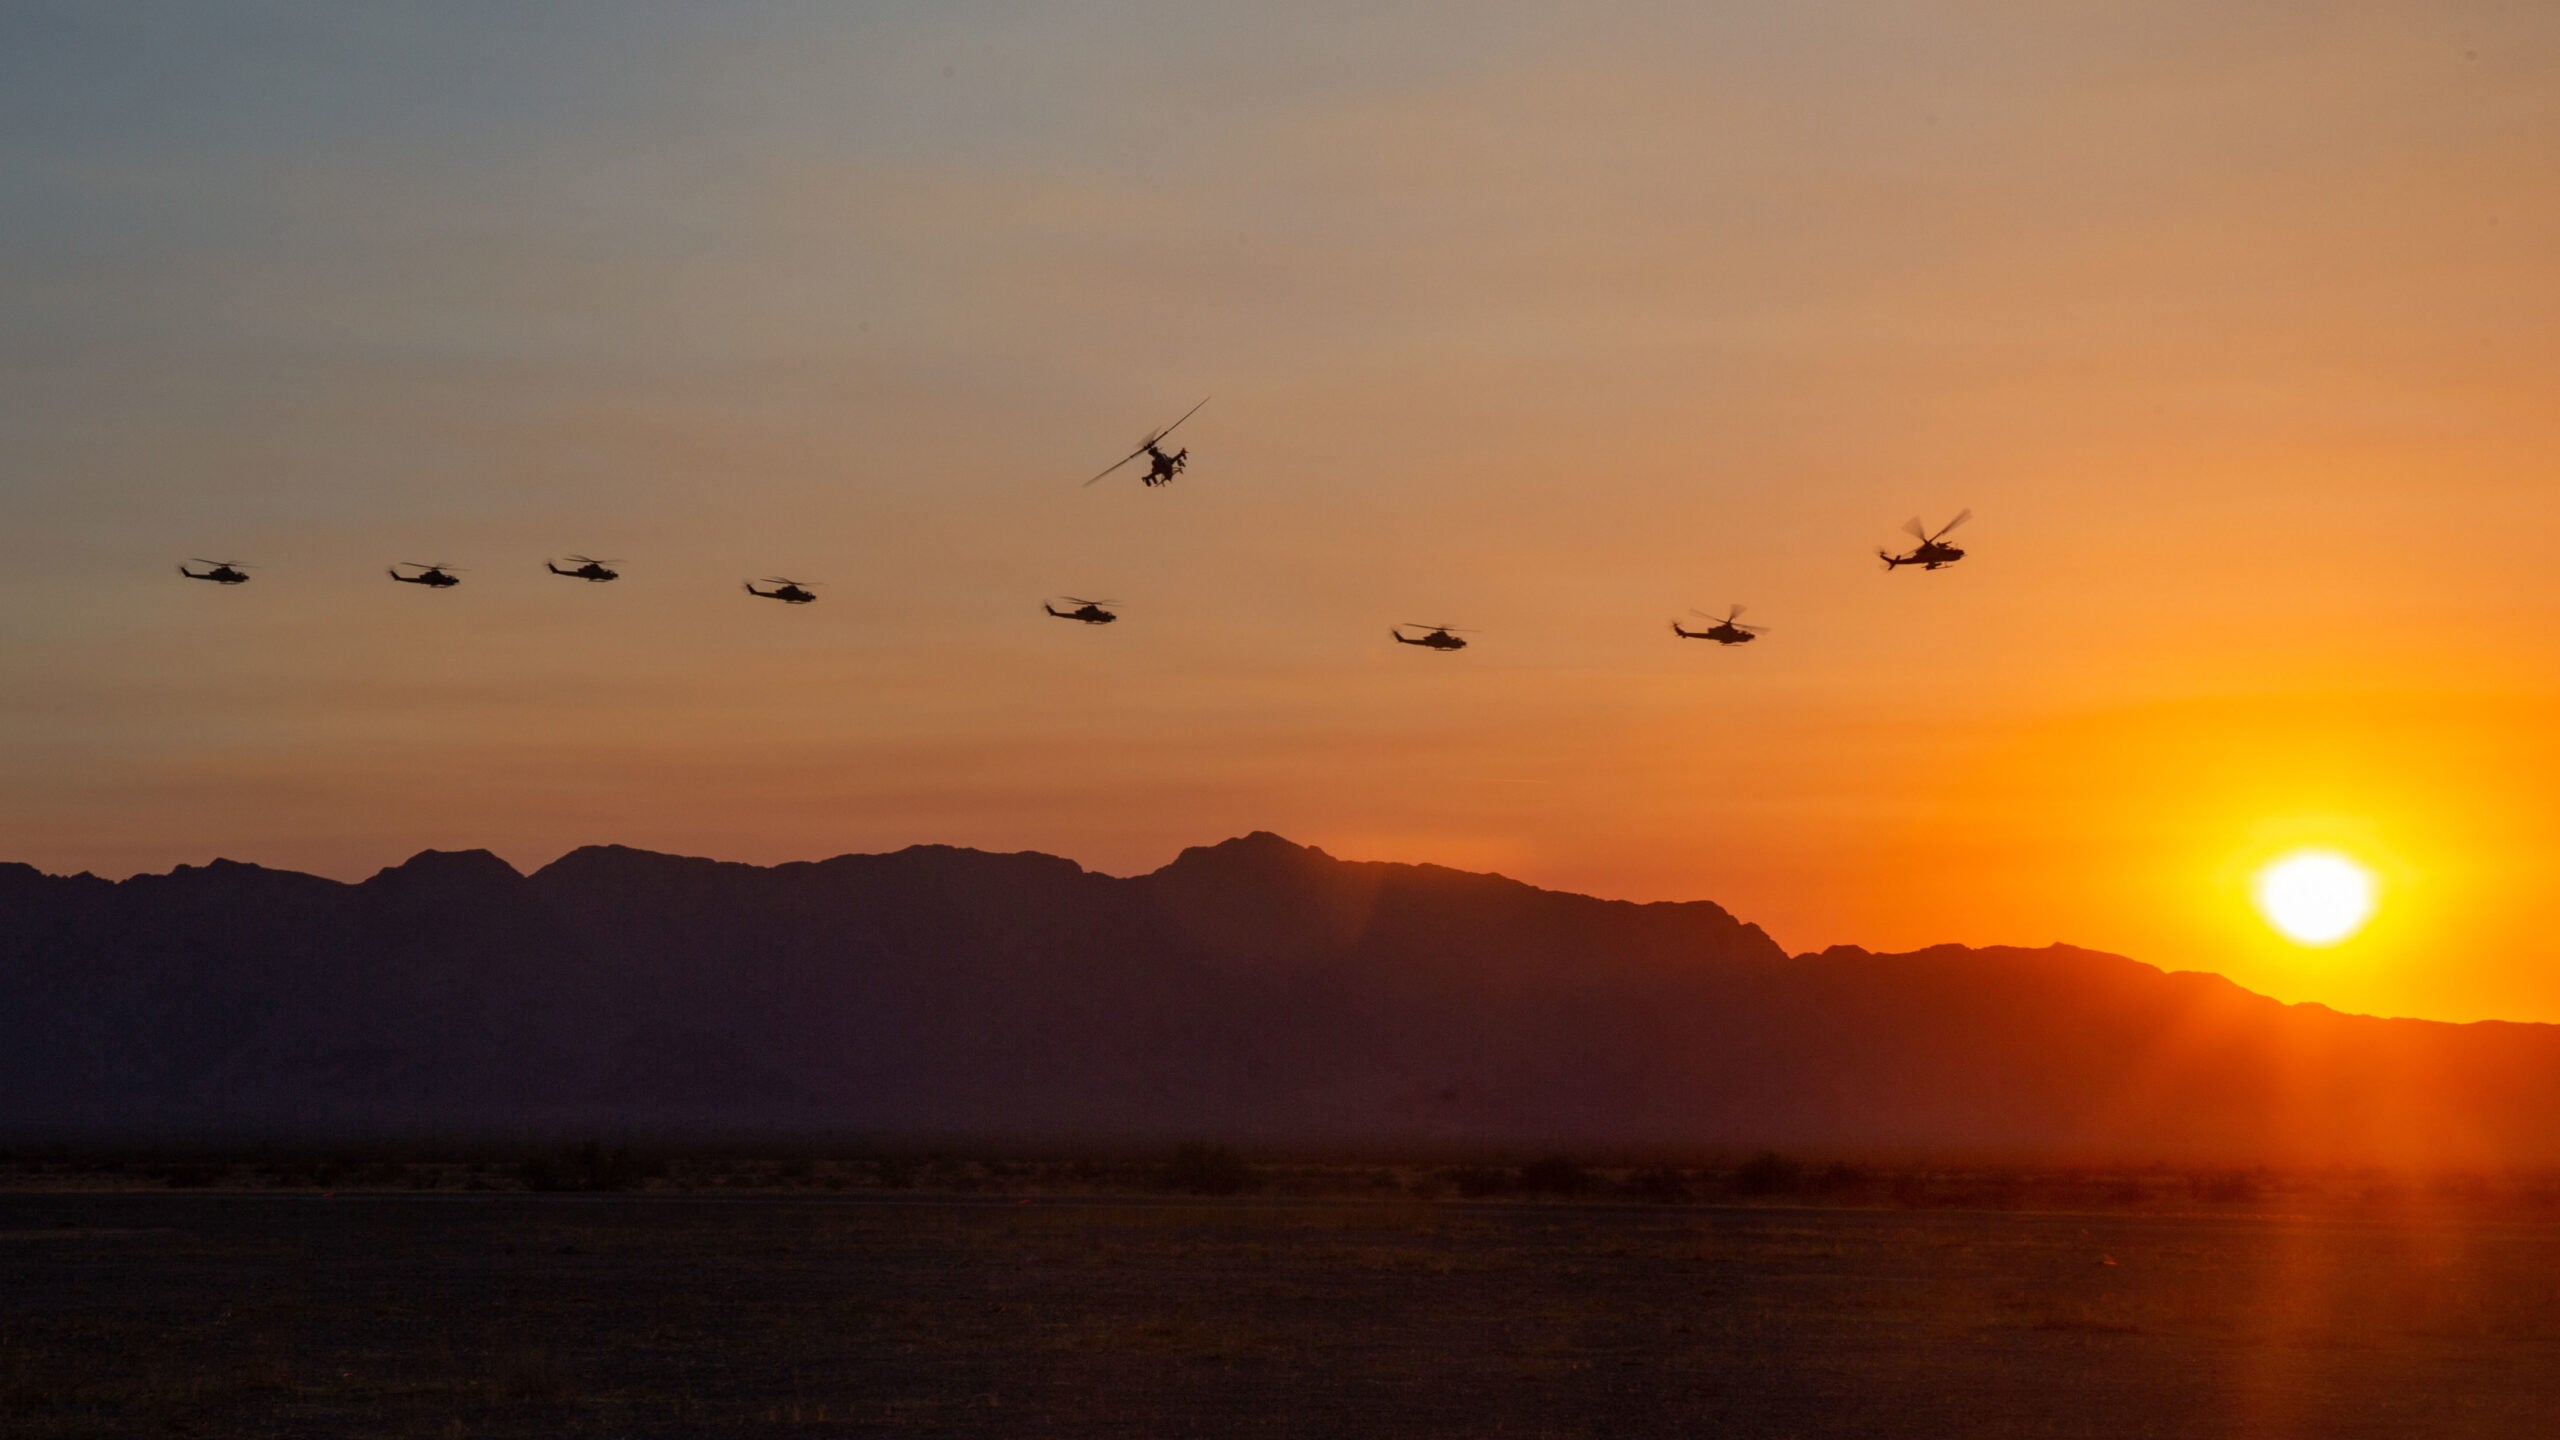 U.S. Marine Corps AH-1Z Vipers, assigned to Marine Aviation Weapons and Tactics Squadron One (MAWTS-1), fly to a forward arming and refueling point during Weapons and Tactics Instructor (WTI) course 1-21, at Stoval Airfield, Dateland, Arizona, Oct. 16, 2020. The WTI course is a seven-week training event hosted by MAWTS-1, providing standardized advanced tactical training and certification of unit instructor qualifications to support Marine aviation training and readiness and assists in developing and employing aviation weapons and tactics. (U.S. Marine Corps photo by Sgt. Alexander N. Sturdivant)